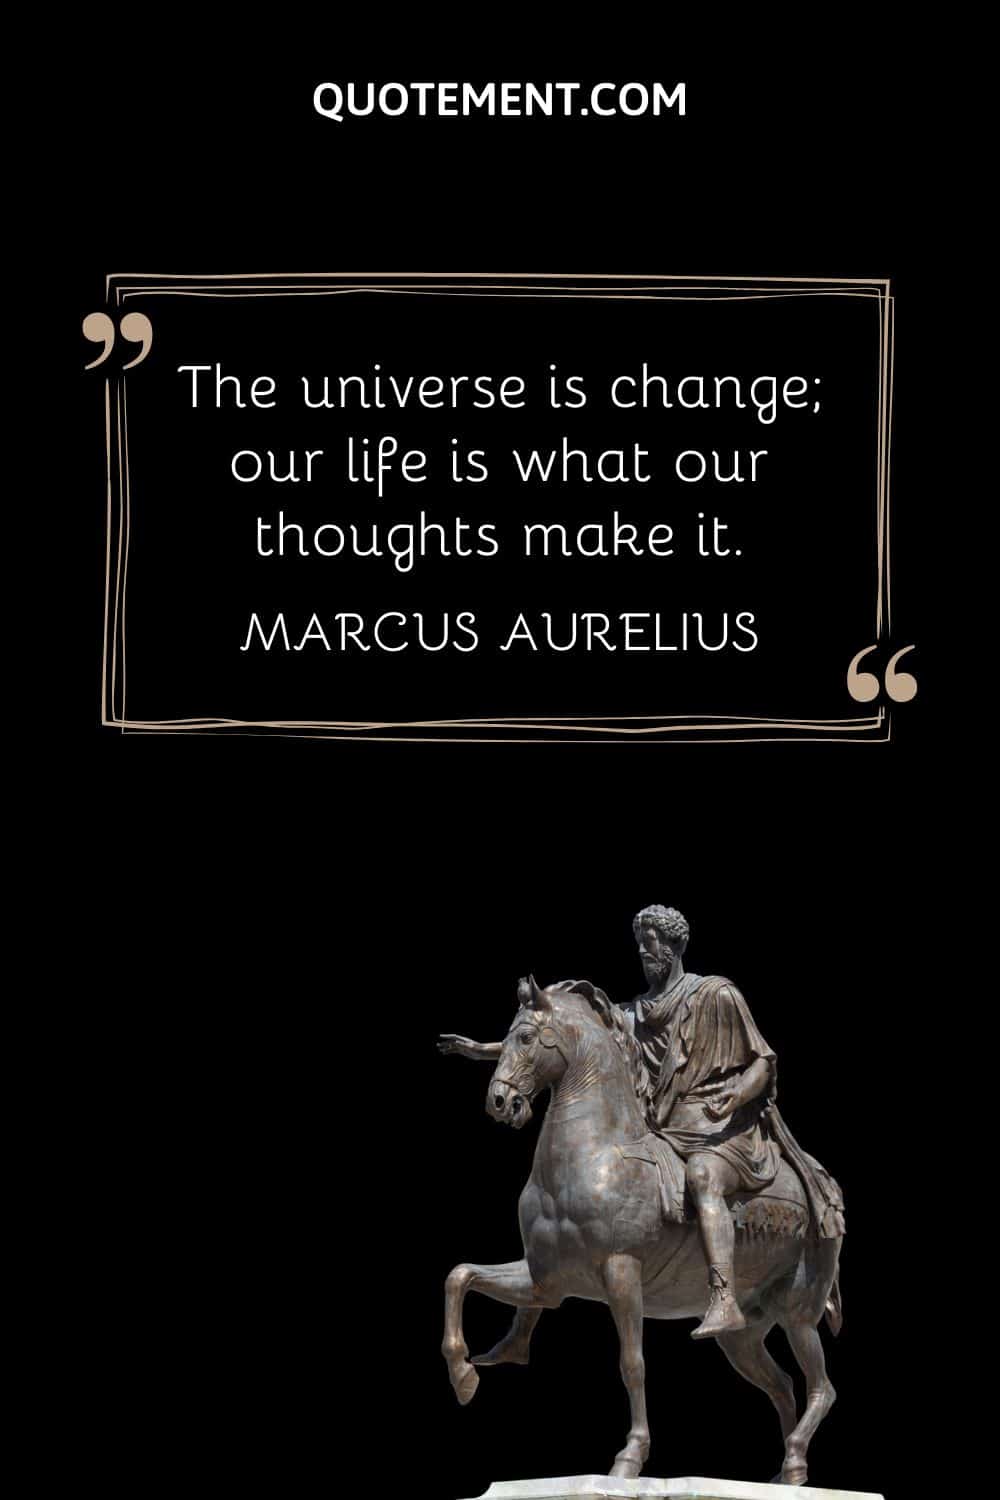 “The universe is change; our life is what our thoughts make it.” — Marcus Aurelius